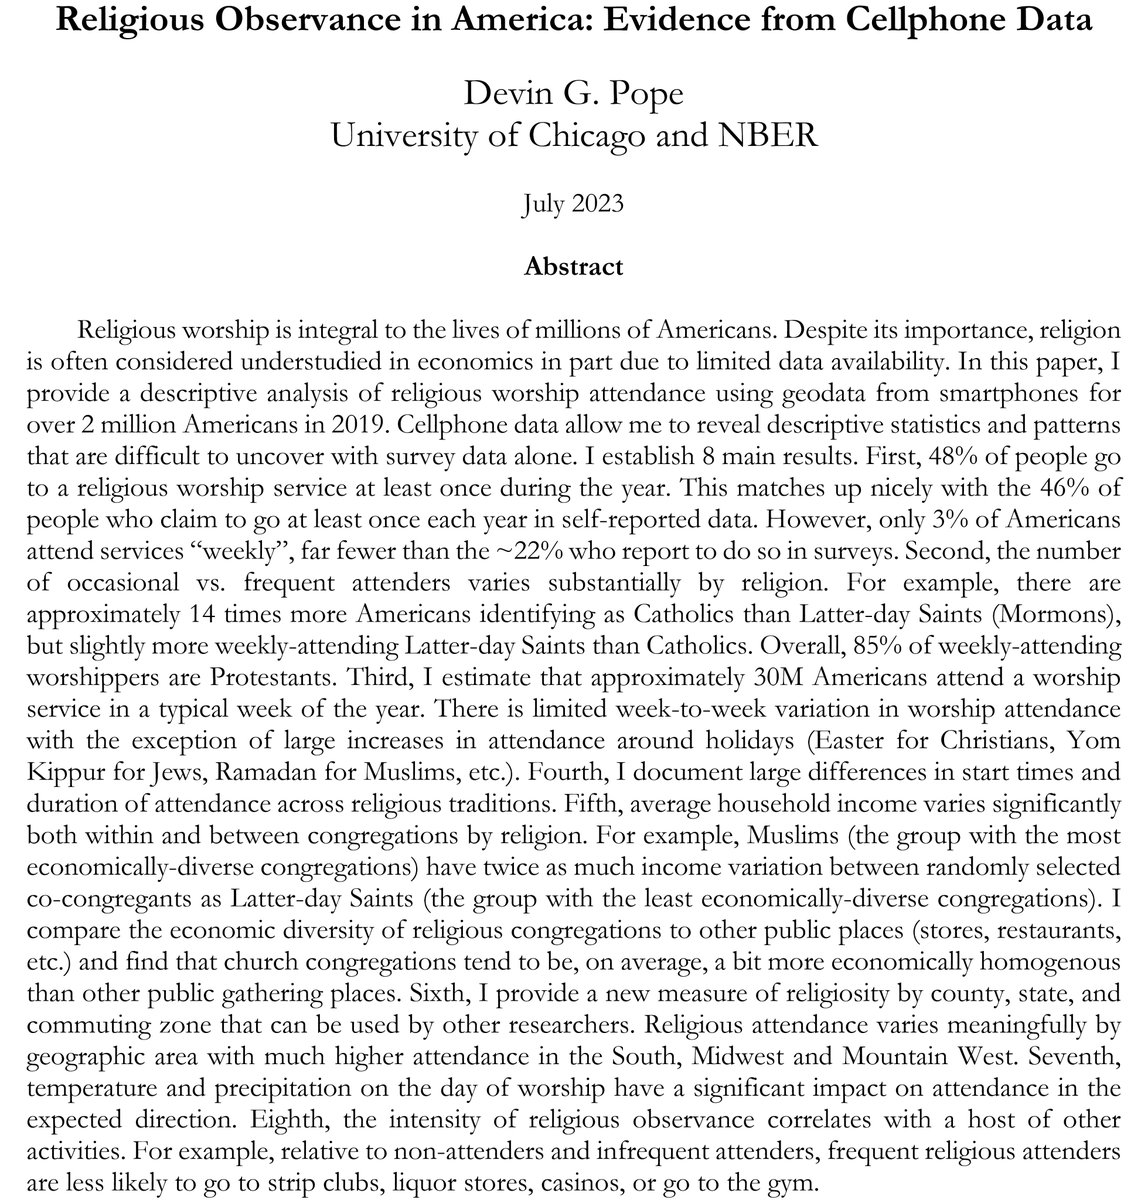 I am wrapping up a paper (see abstract below) titled 'Religious Observance in America: Evidence from Cellphone Data'. I have a gazillion figures about religion that I think are pretty interesting and make for fun Twitter content.